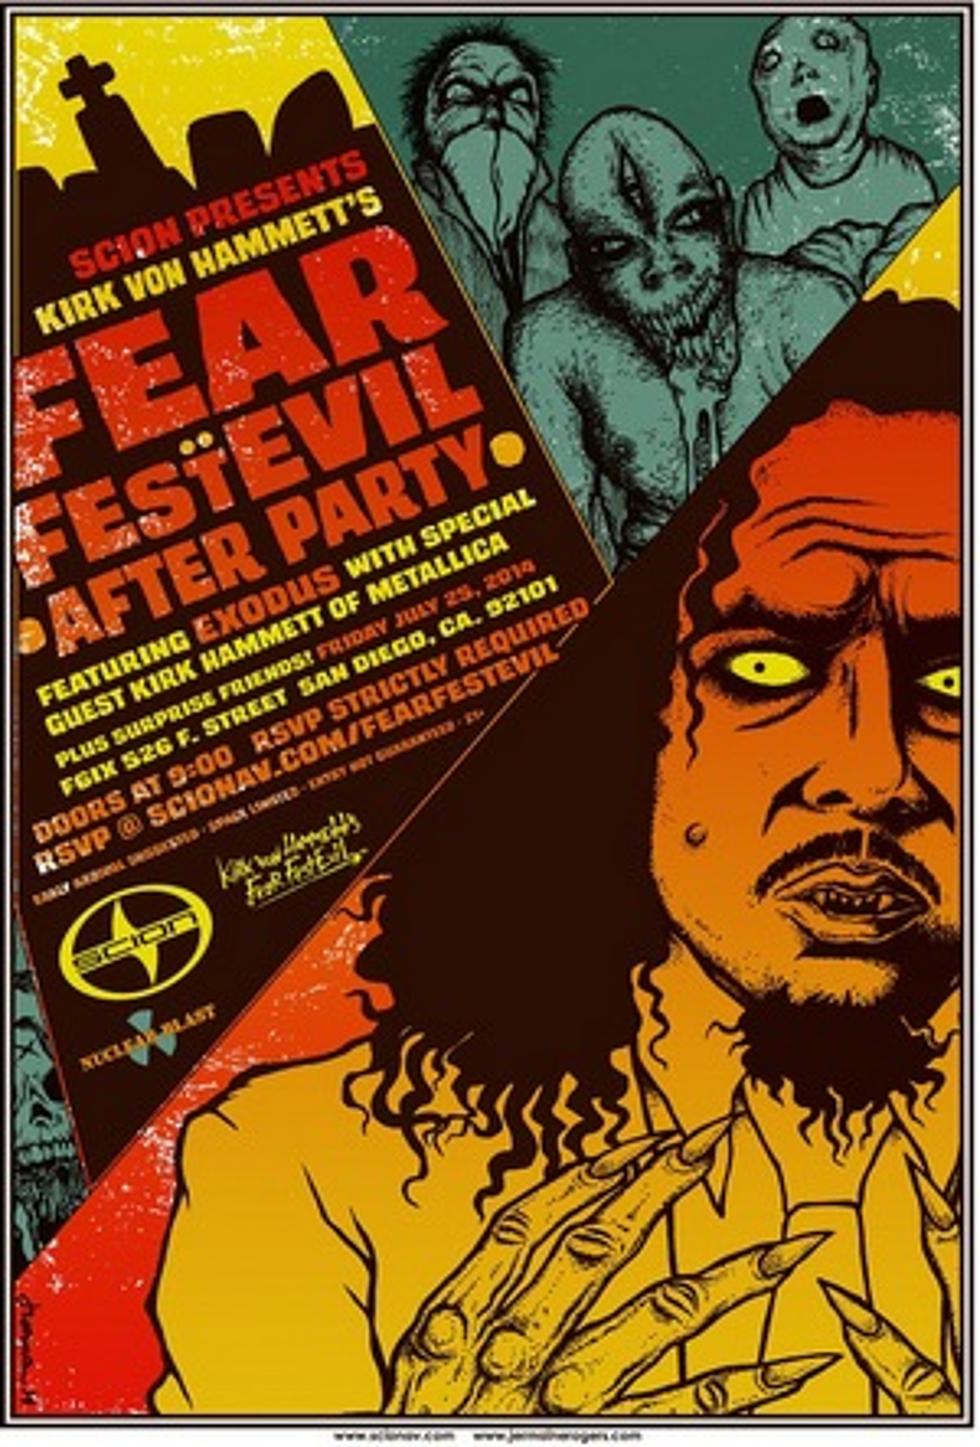 Metallica&#8217;s Kirk Hammett To Jam With Exodus at Fear FestEvil Show During Comic-Con